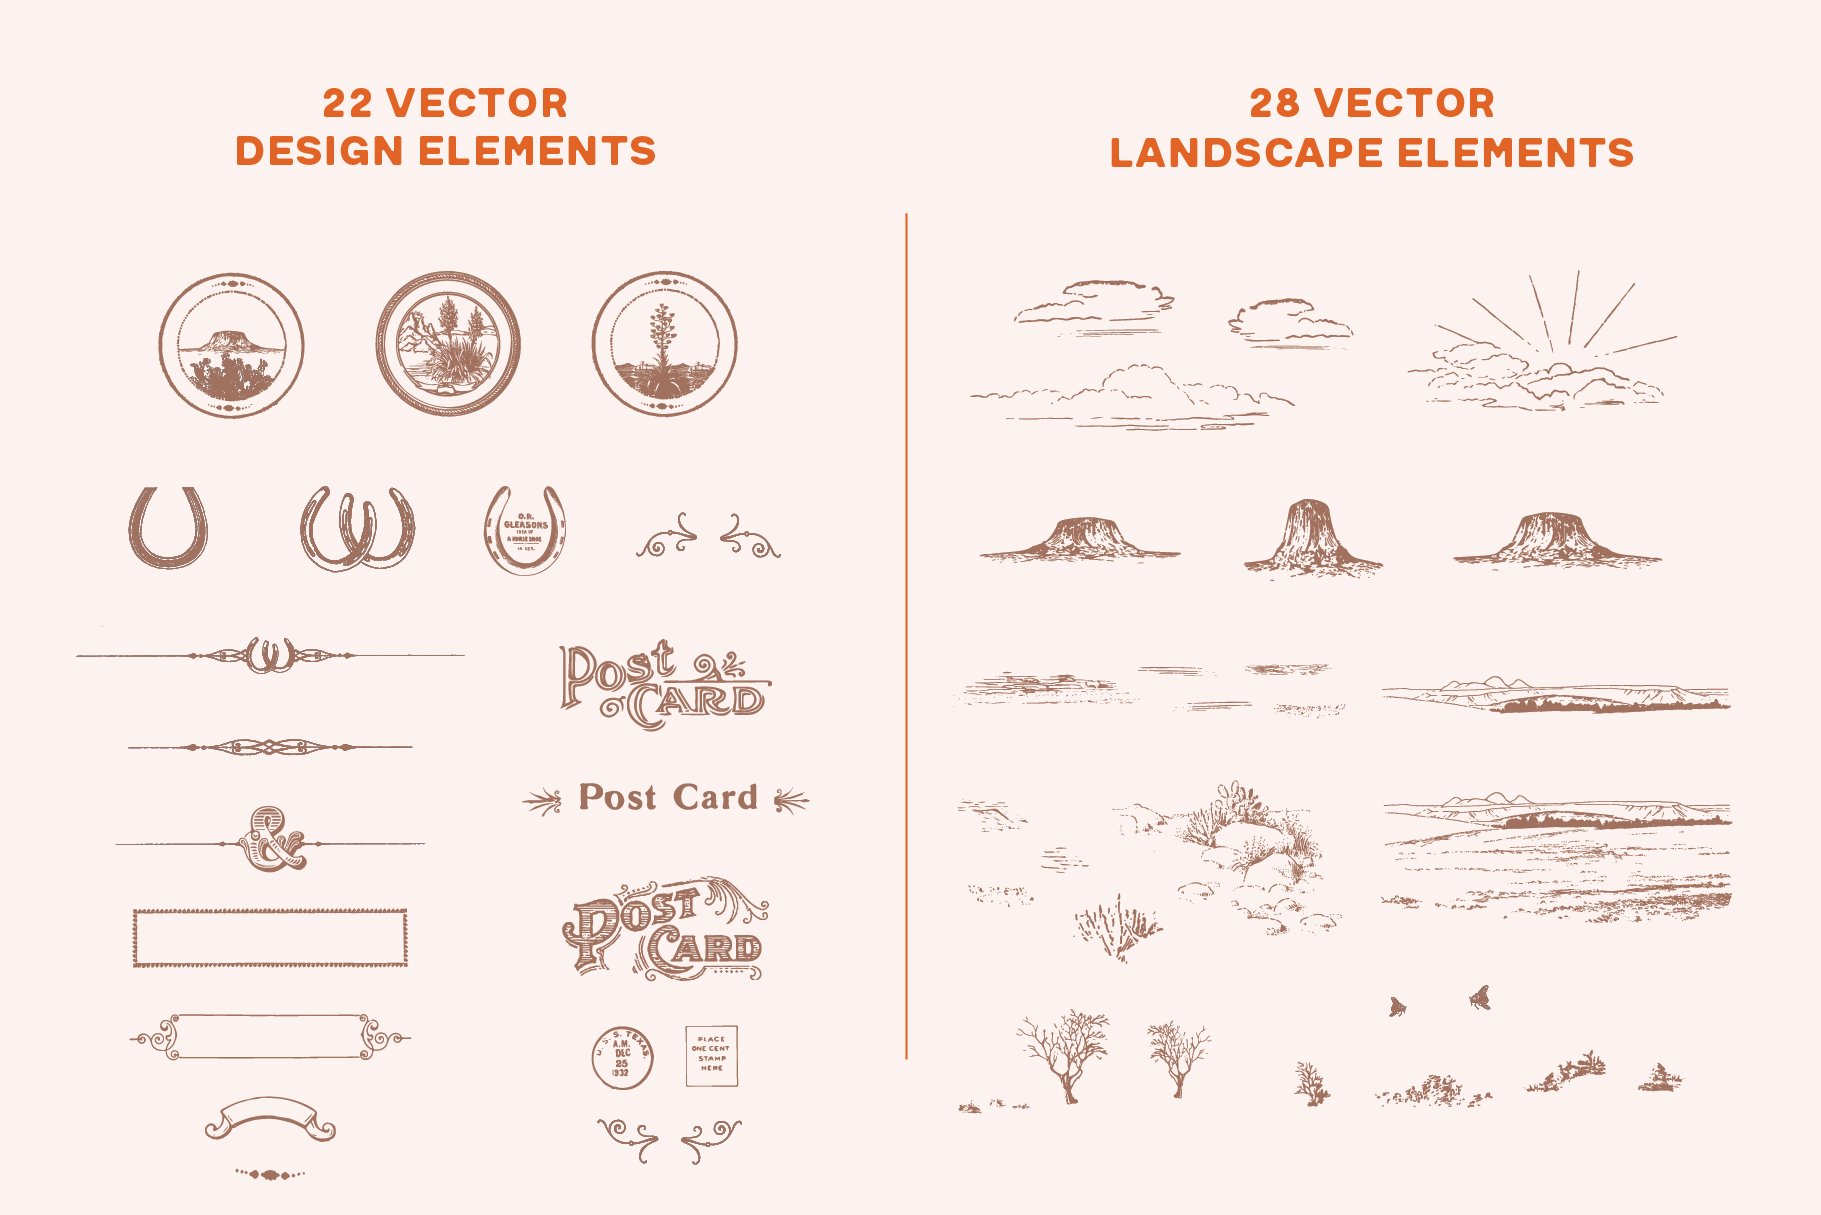 Set of hand drawn elements for a landscape.